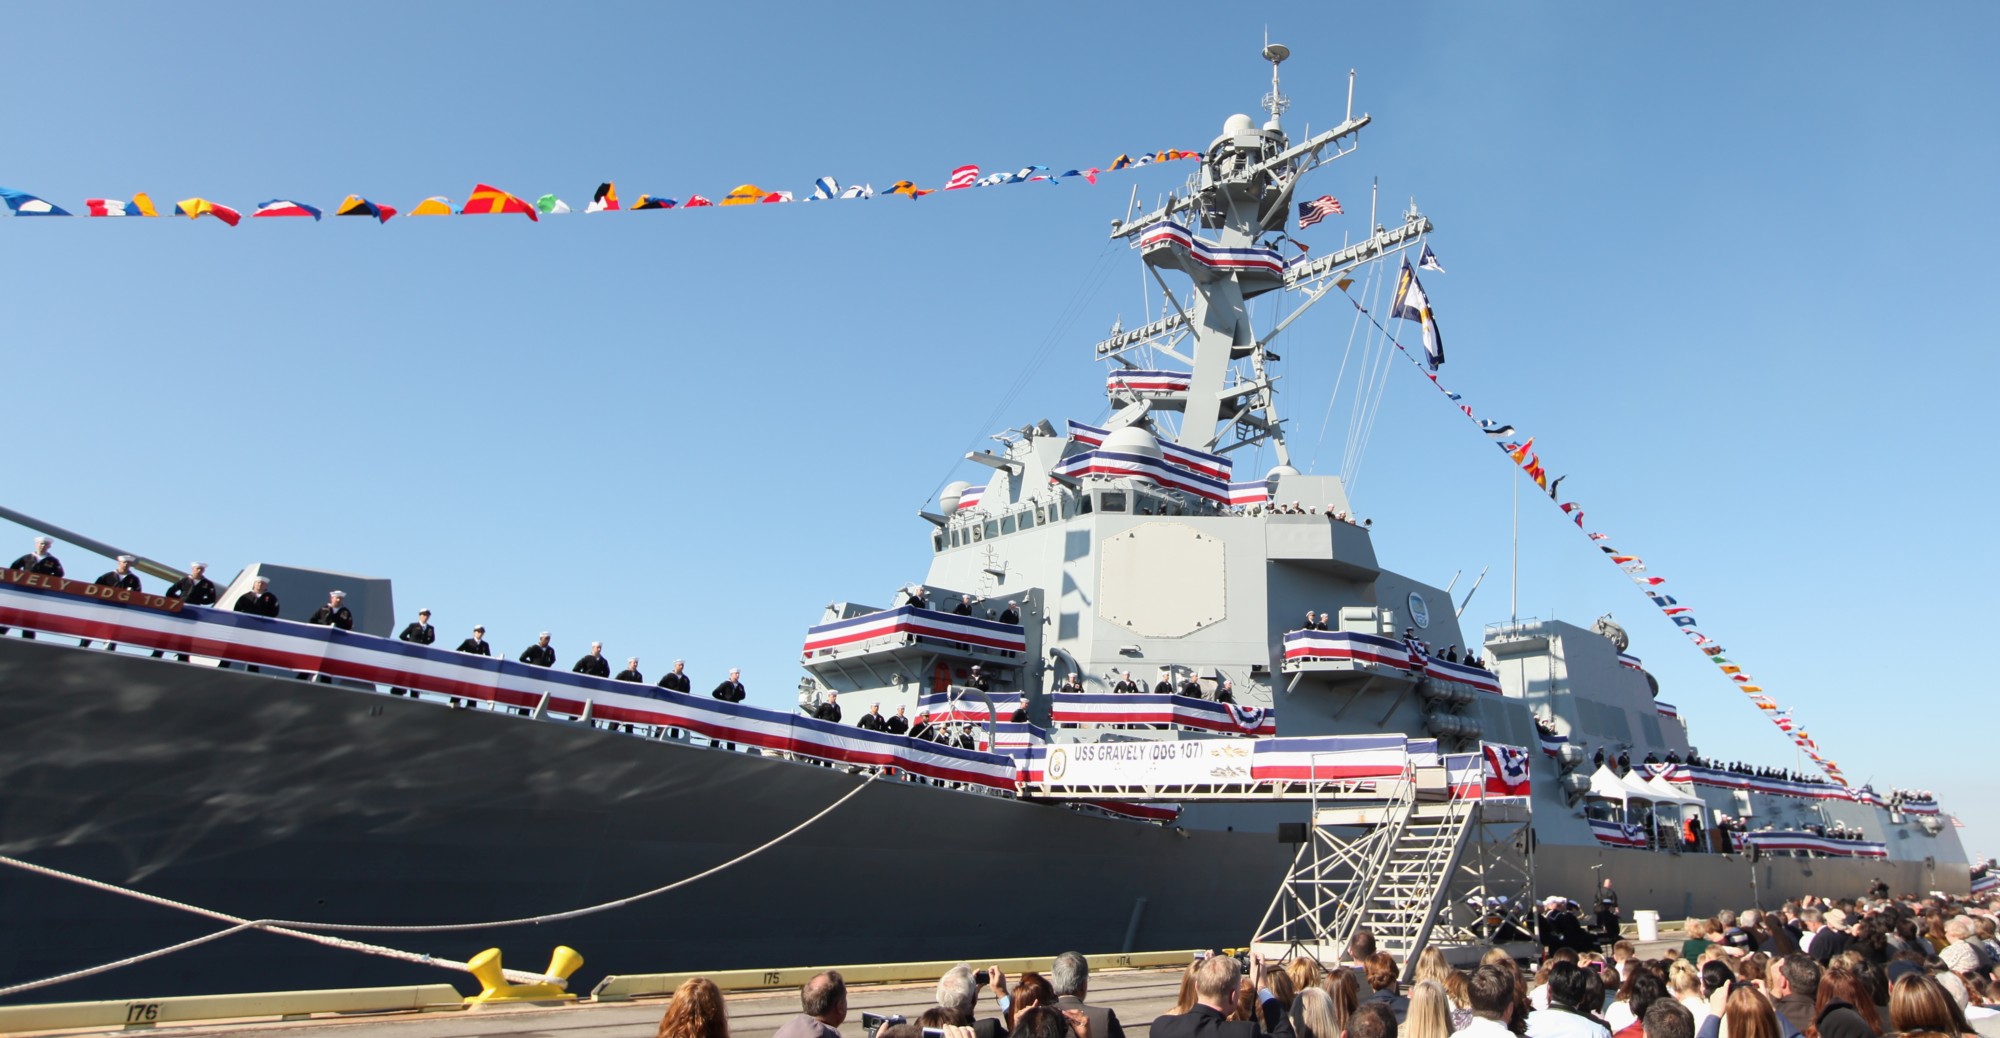 ddg-107 uss gravely arleigh burke class guided missile destroyer aegis us navy commissioning wilmington north carolina 2010 03